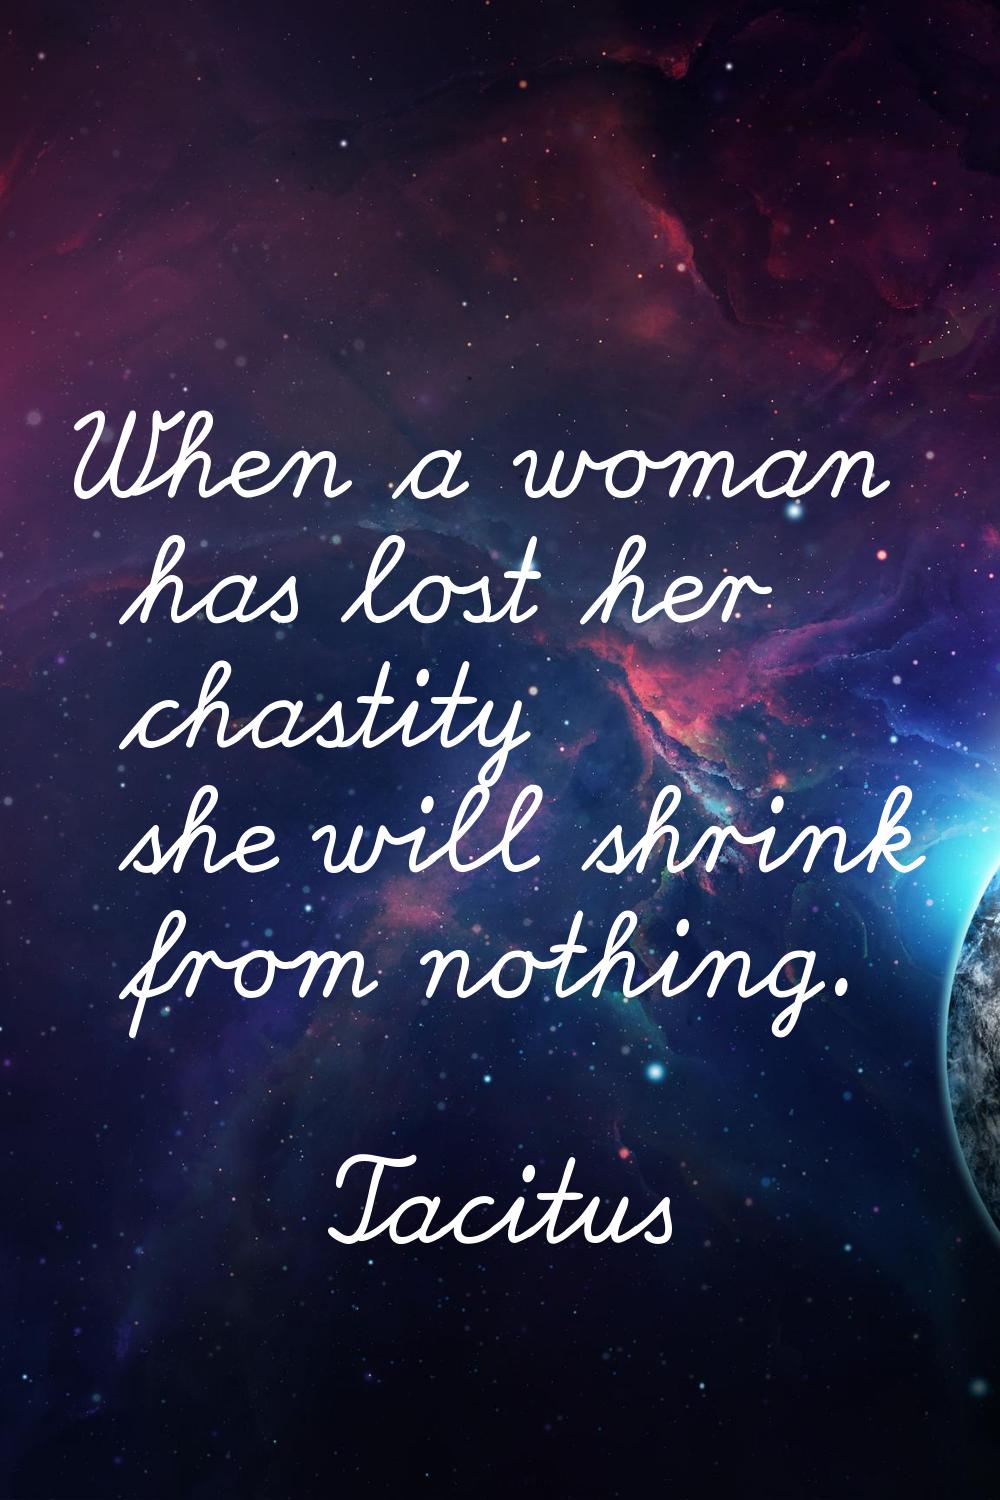 When a woman has lost her chastity she will shrink from nothing.